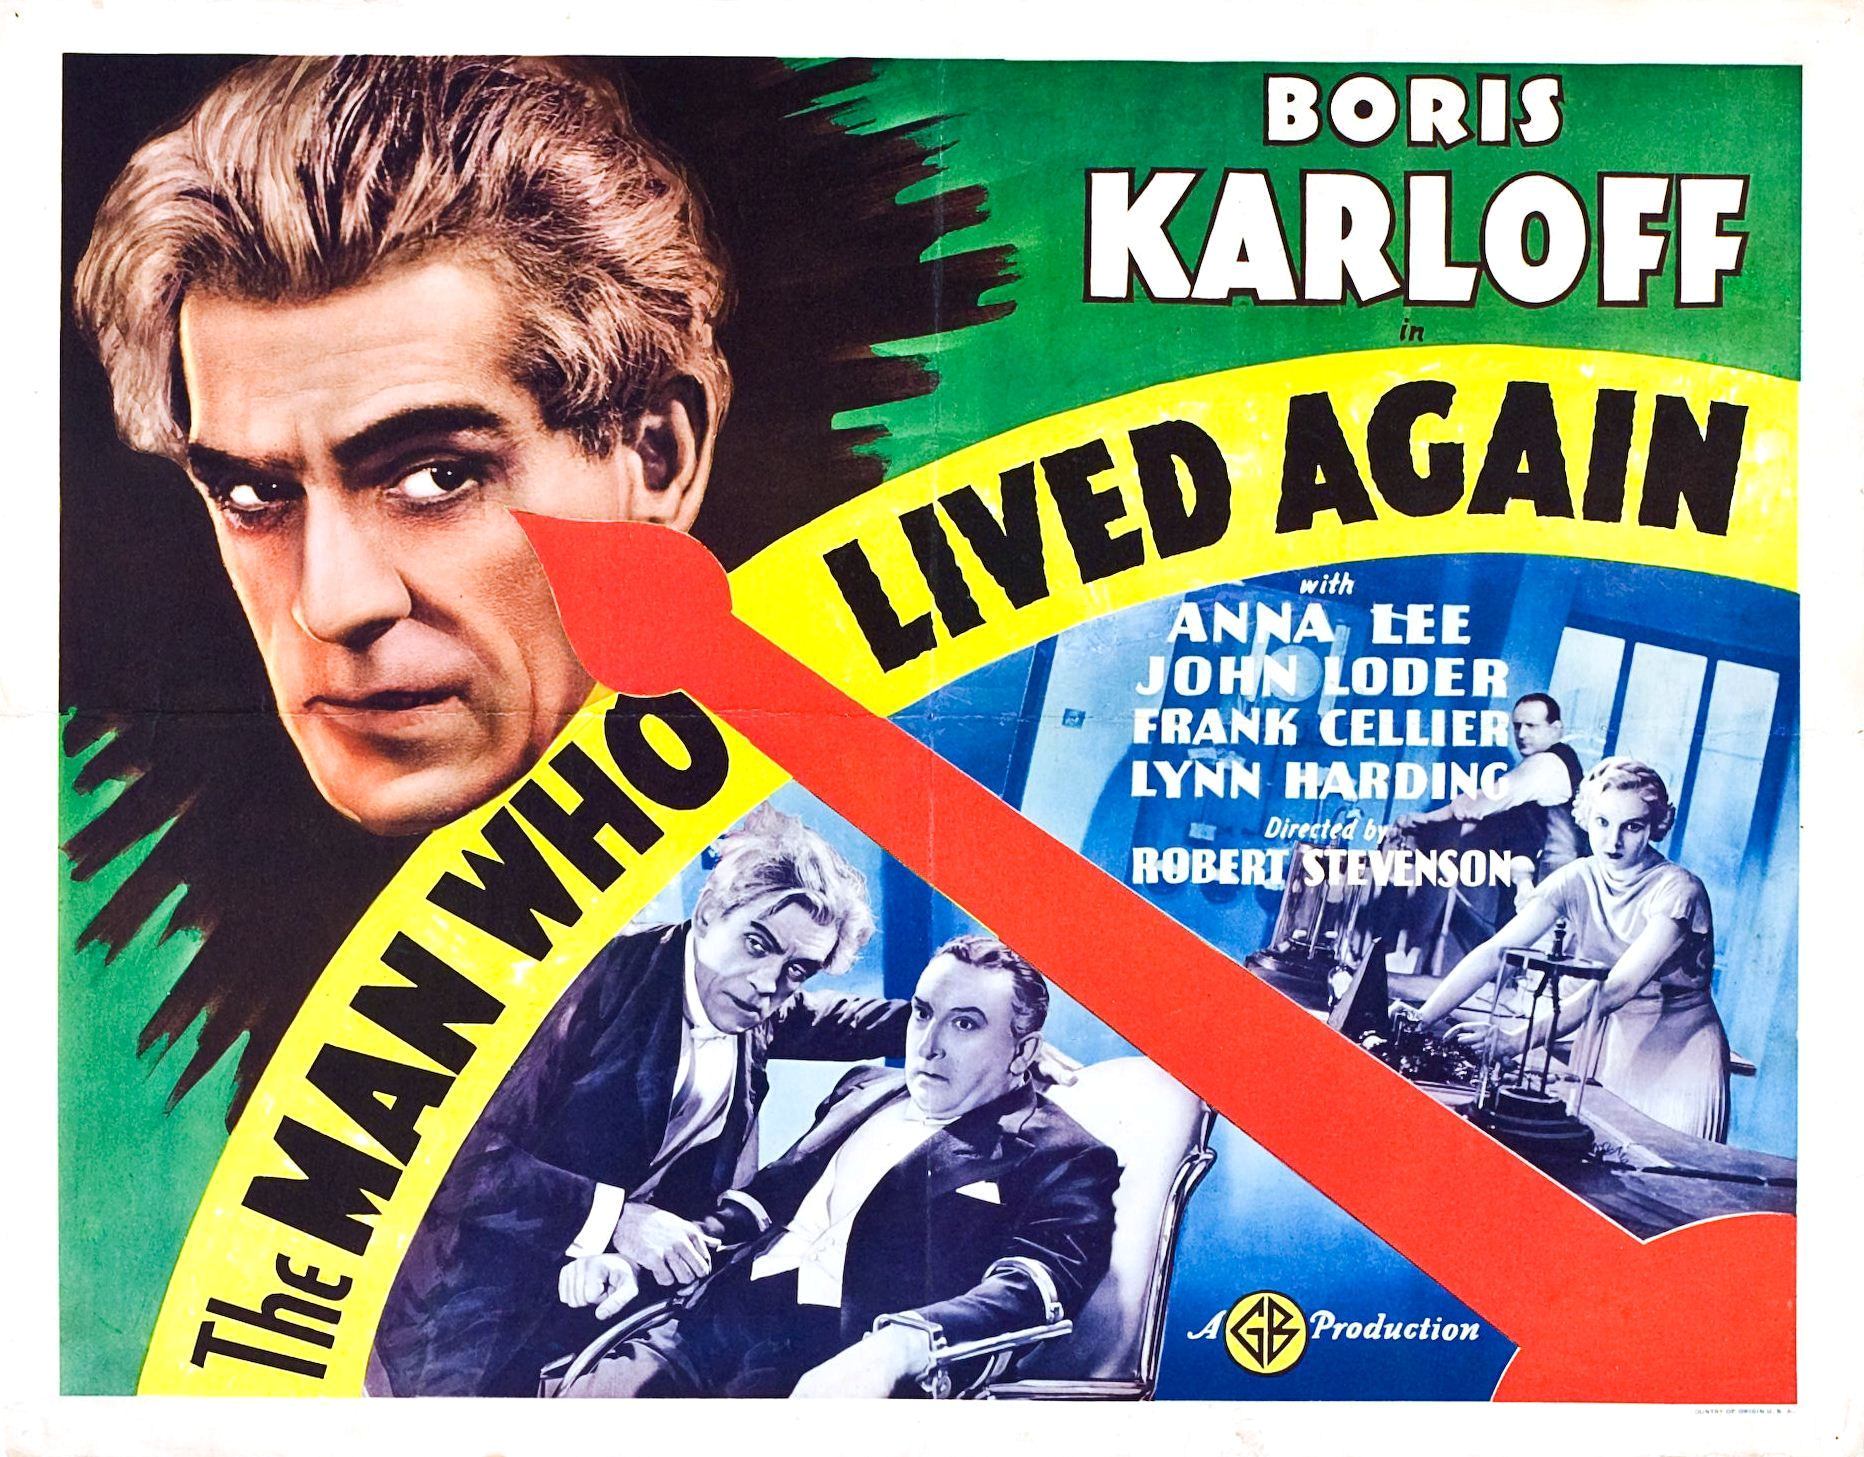 The Man Who Lived Again (1936)